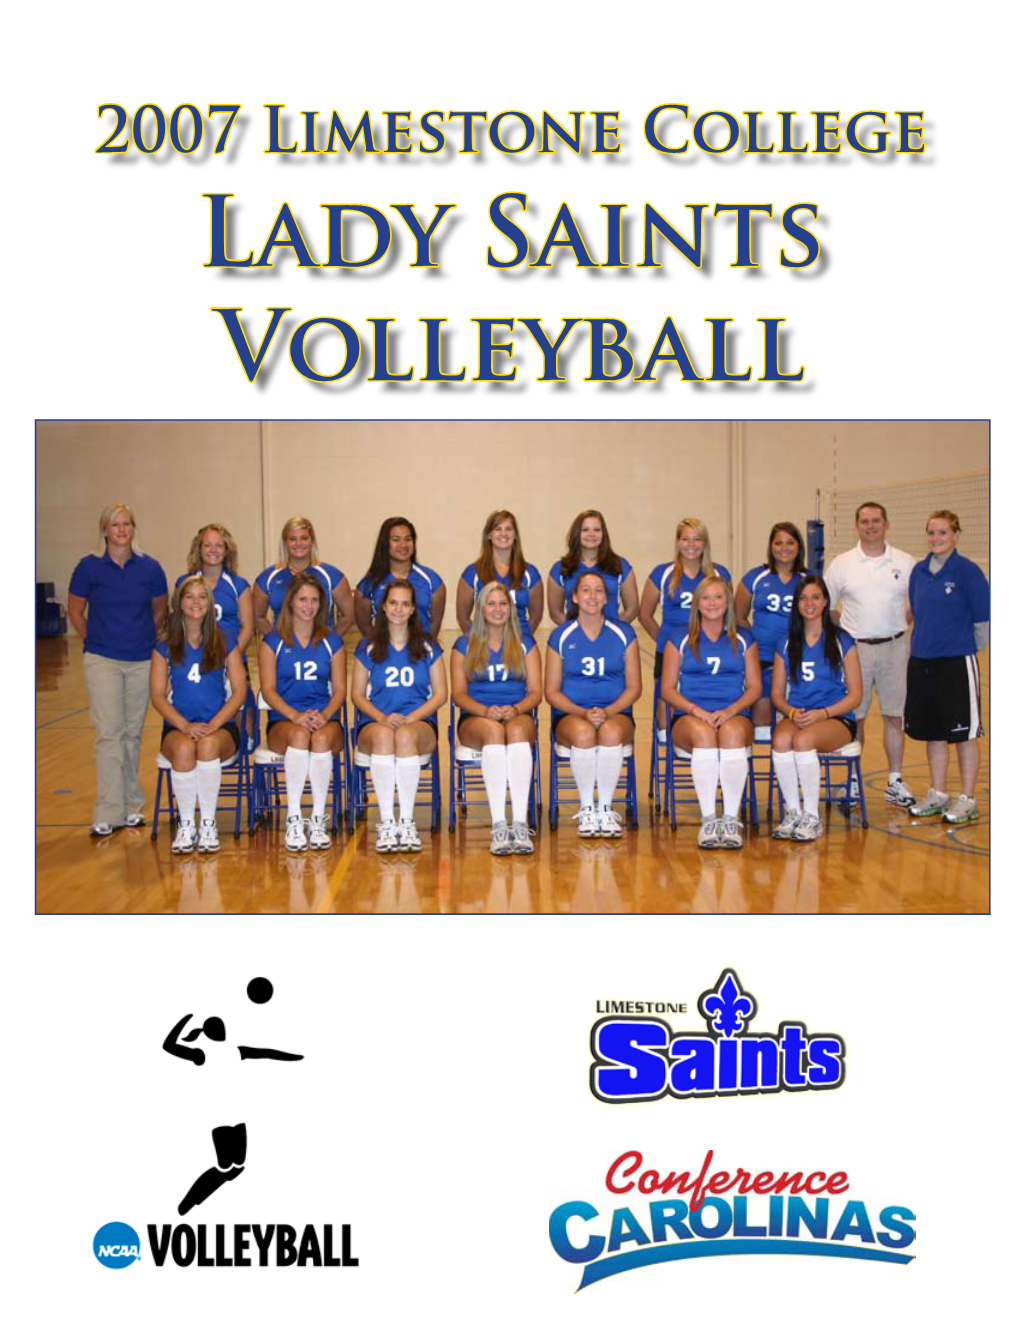 Lady Saints Volleyball Quick Facts 2007 Quick Facts Table of Contents College Information Quick Facts